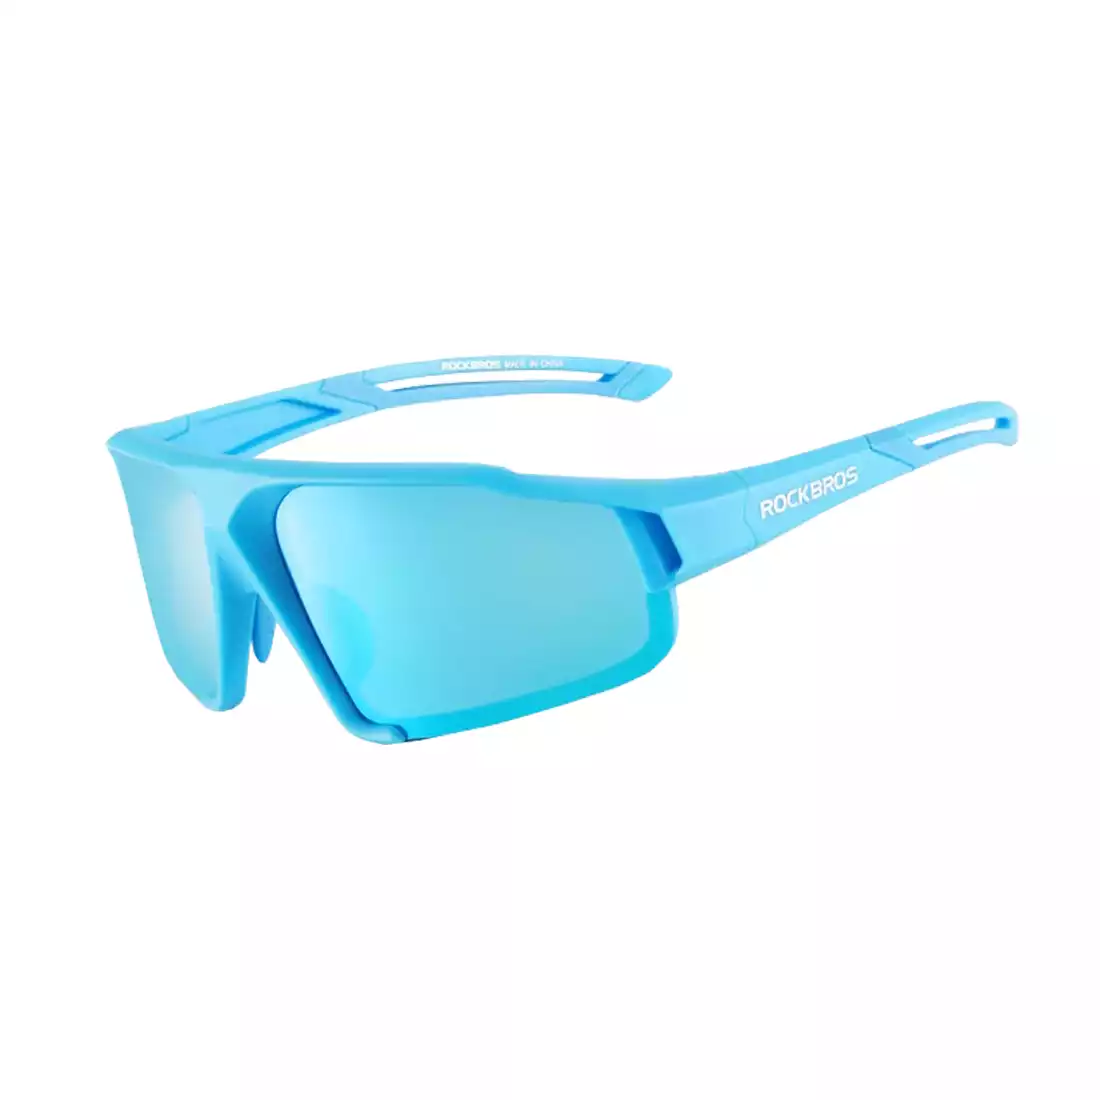 RockBros Polarized Cycling Blue Glasses Sports Sunglasses Outdoor Goggles 